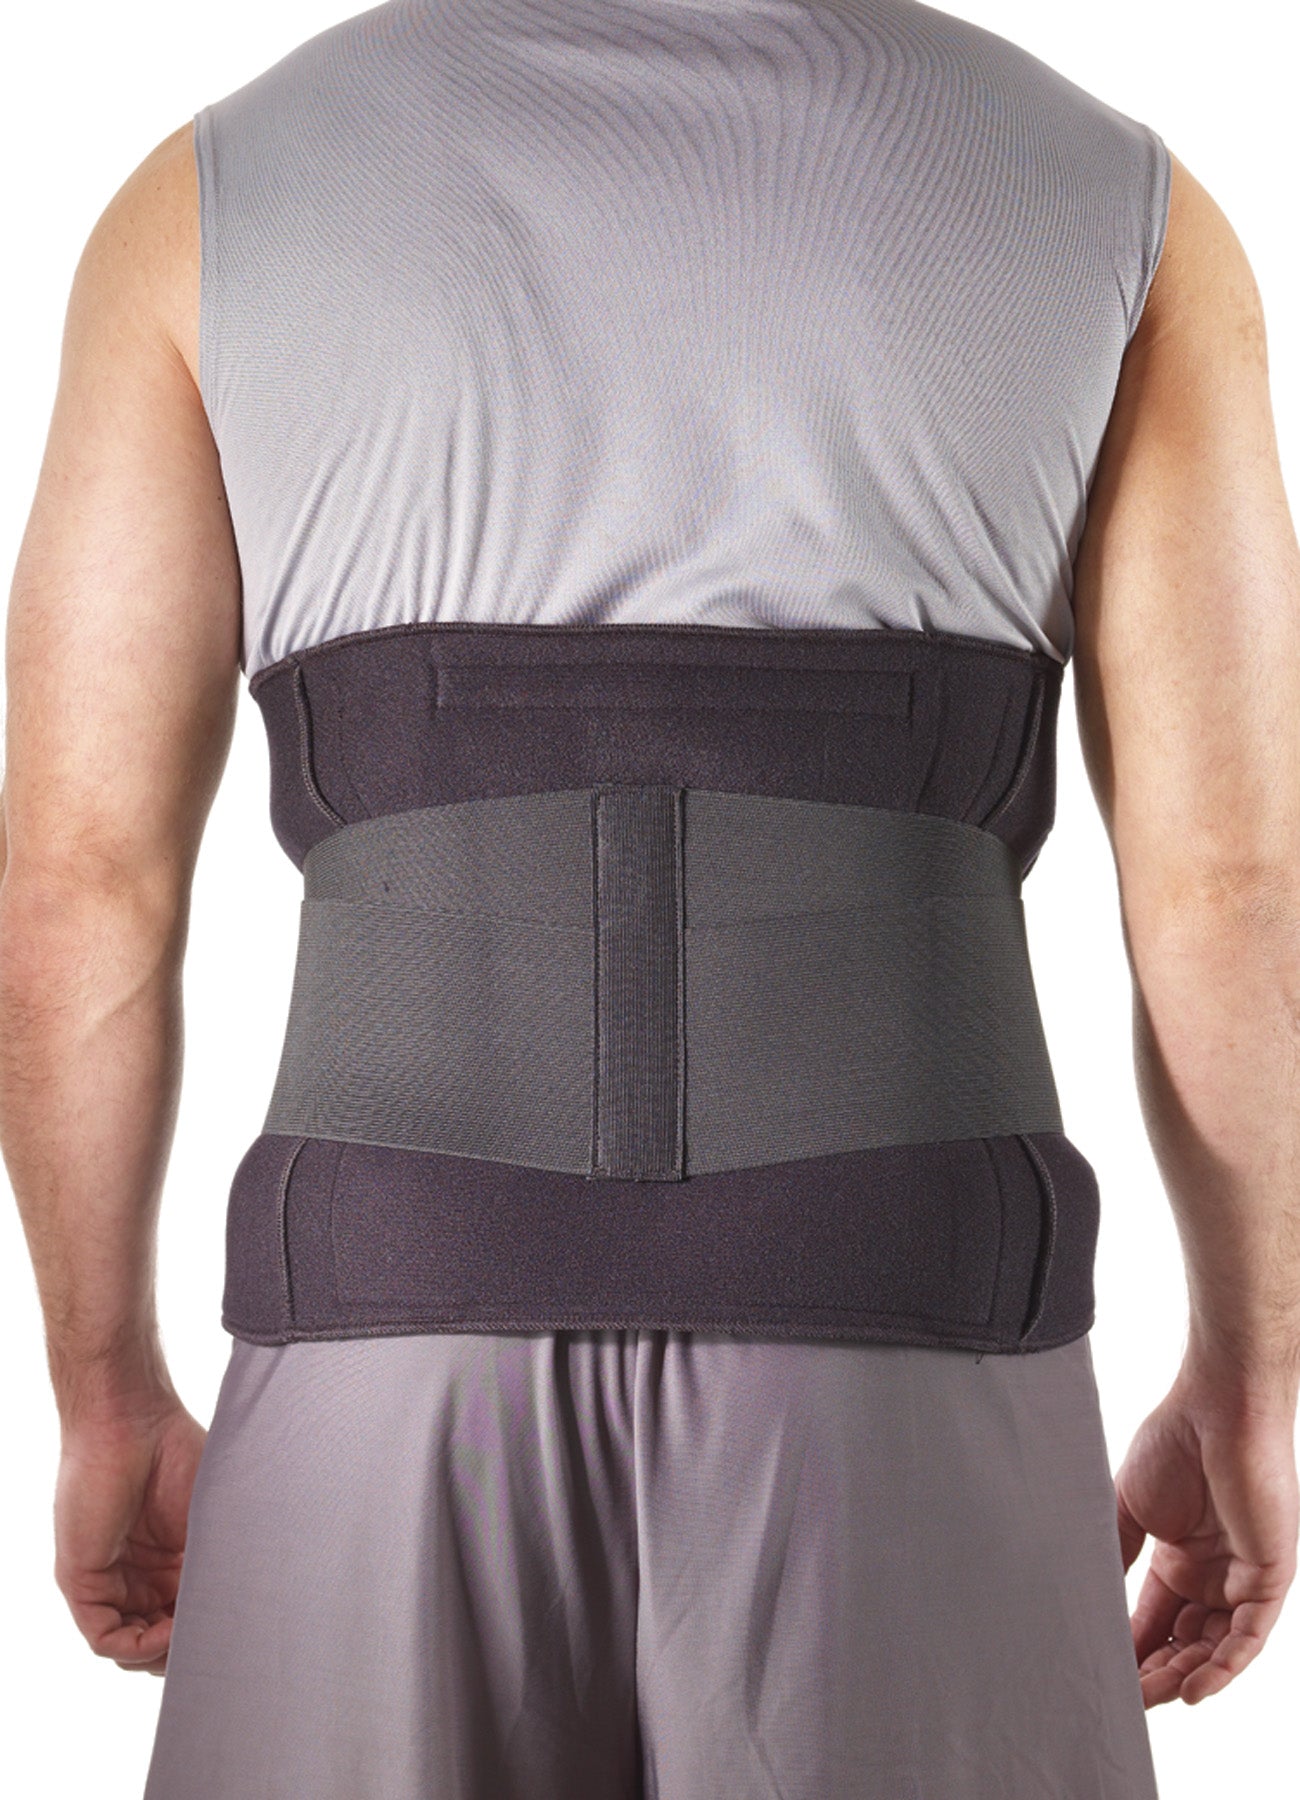 Cryotherm Back Wrap with 4 gels